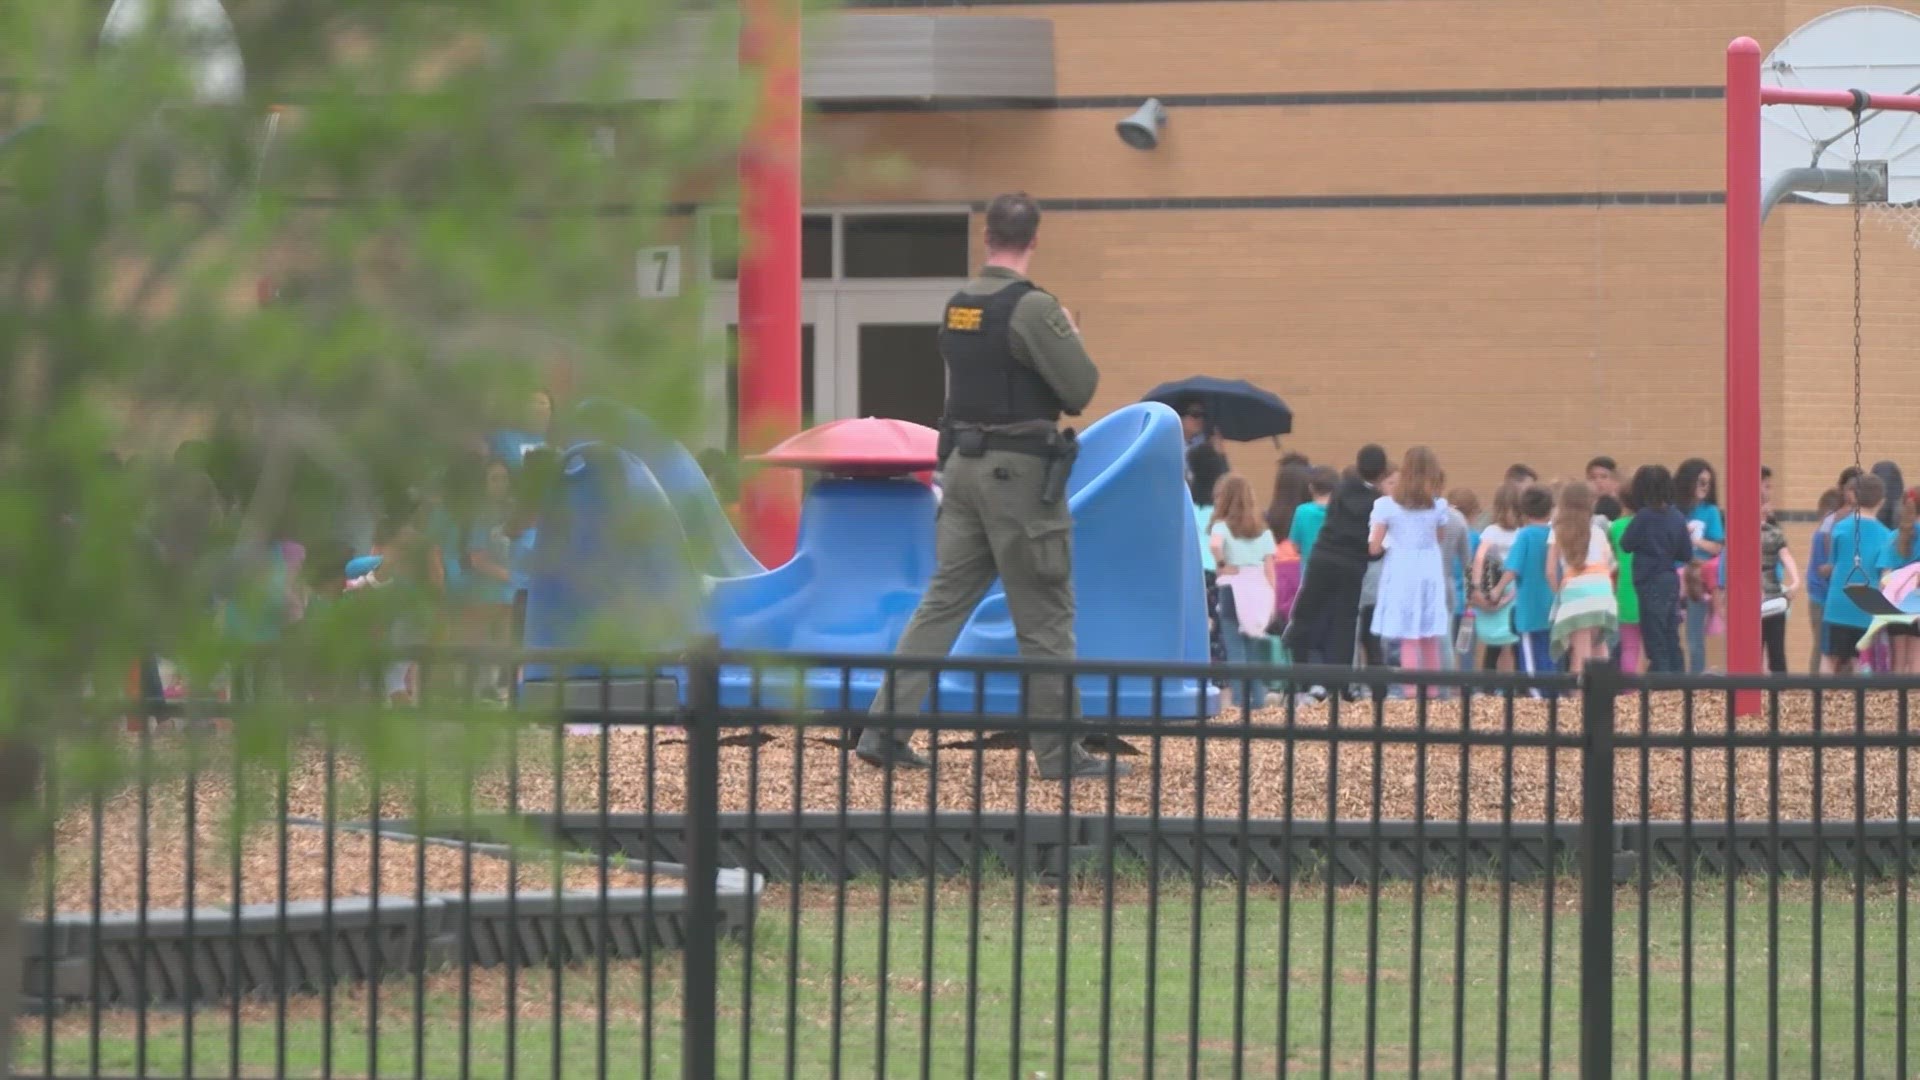 Schools across the North Texas area have changed how they handle security throughout the year since the deadly shooting at a Uvalde elementary school.